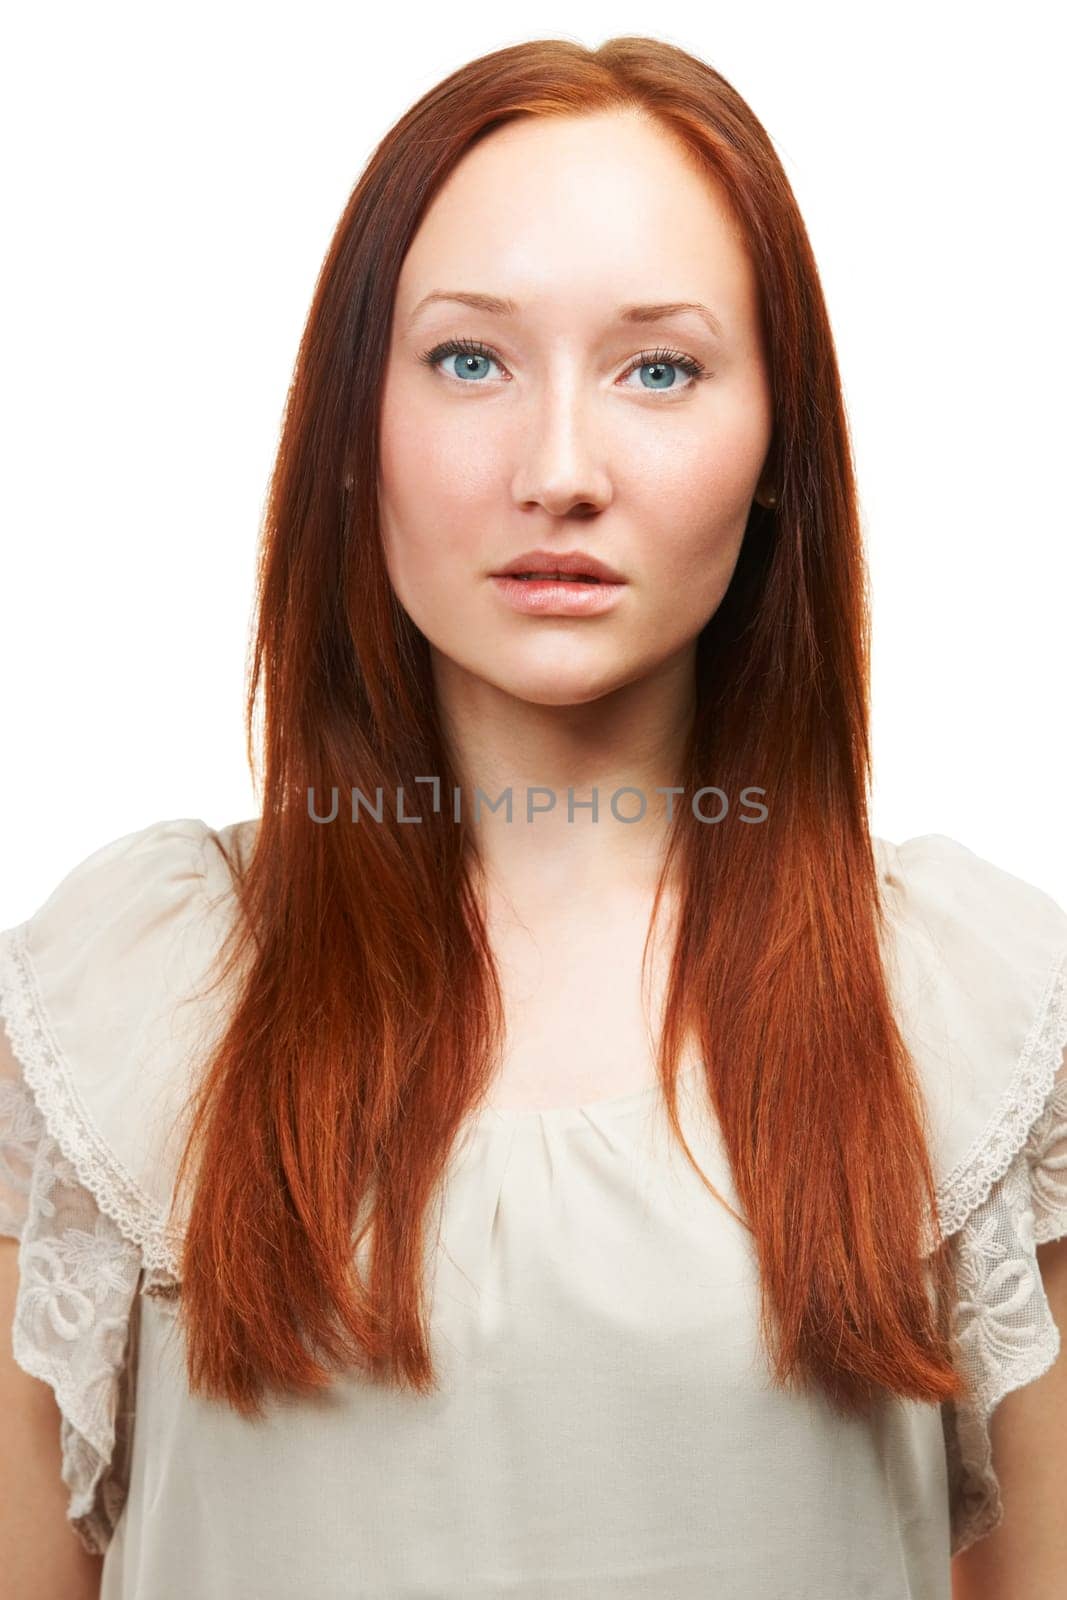 Hair care, ginger or portrait of model with beauty in white background for a natural shine. Face, redhead woman and person in studio with healthy glow, texture or hairstyle results for confidence.